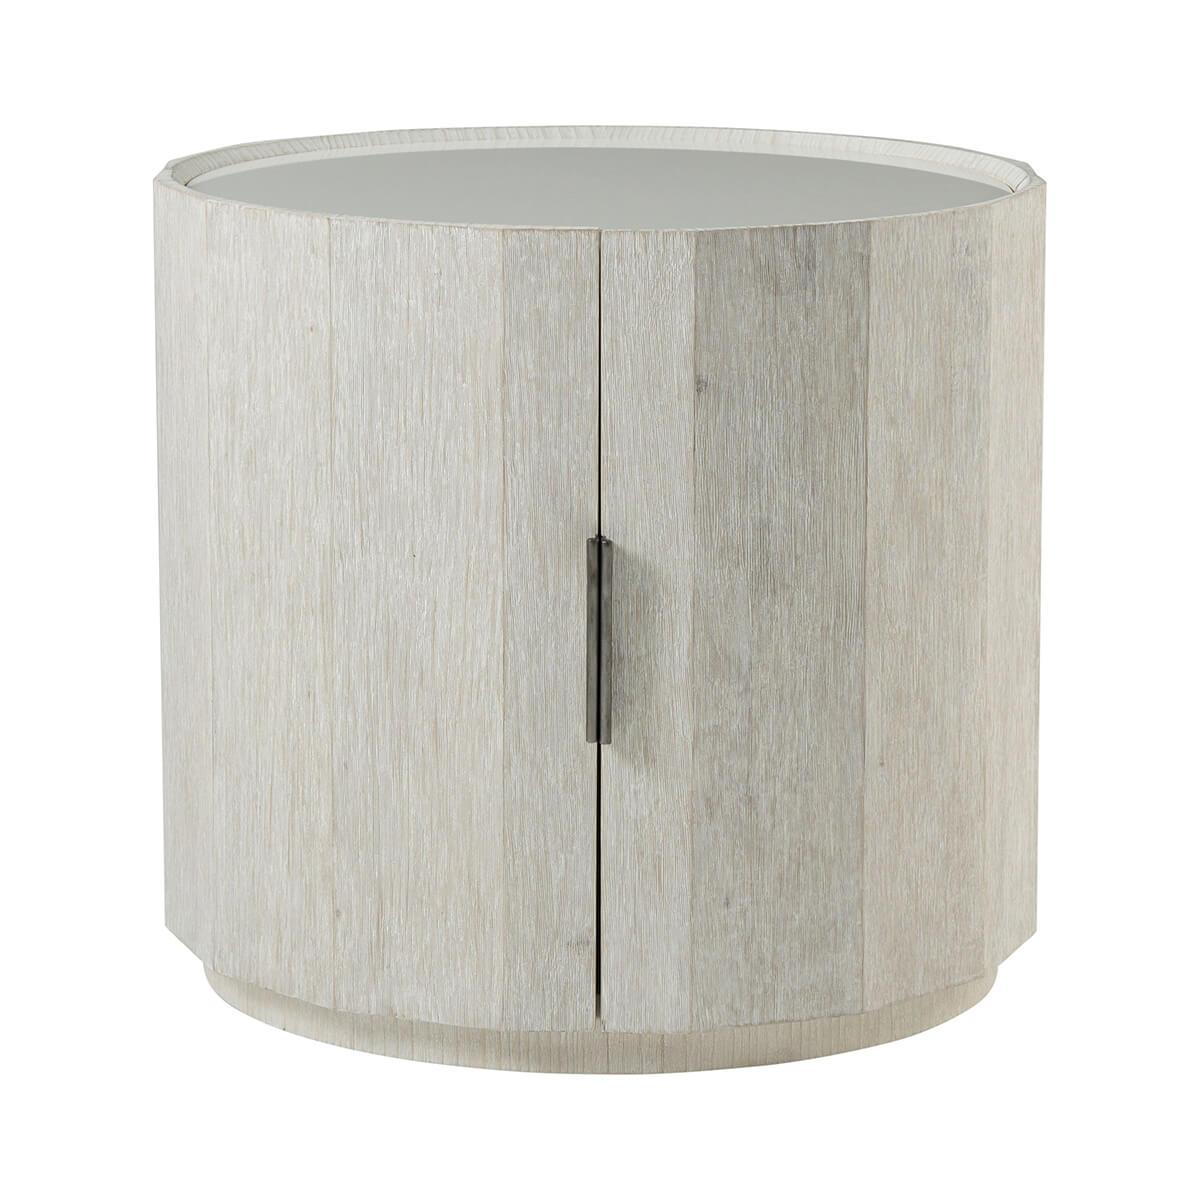 In our Sea Salt Finish, this side table crafted from wire-brushed cerused pine displays a faceted circular exterior of mitered panels with a white limestone top. With two doors with organic ribbed metal hardware that lead to additional storage